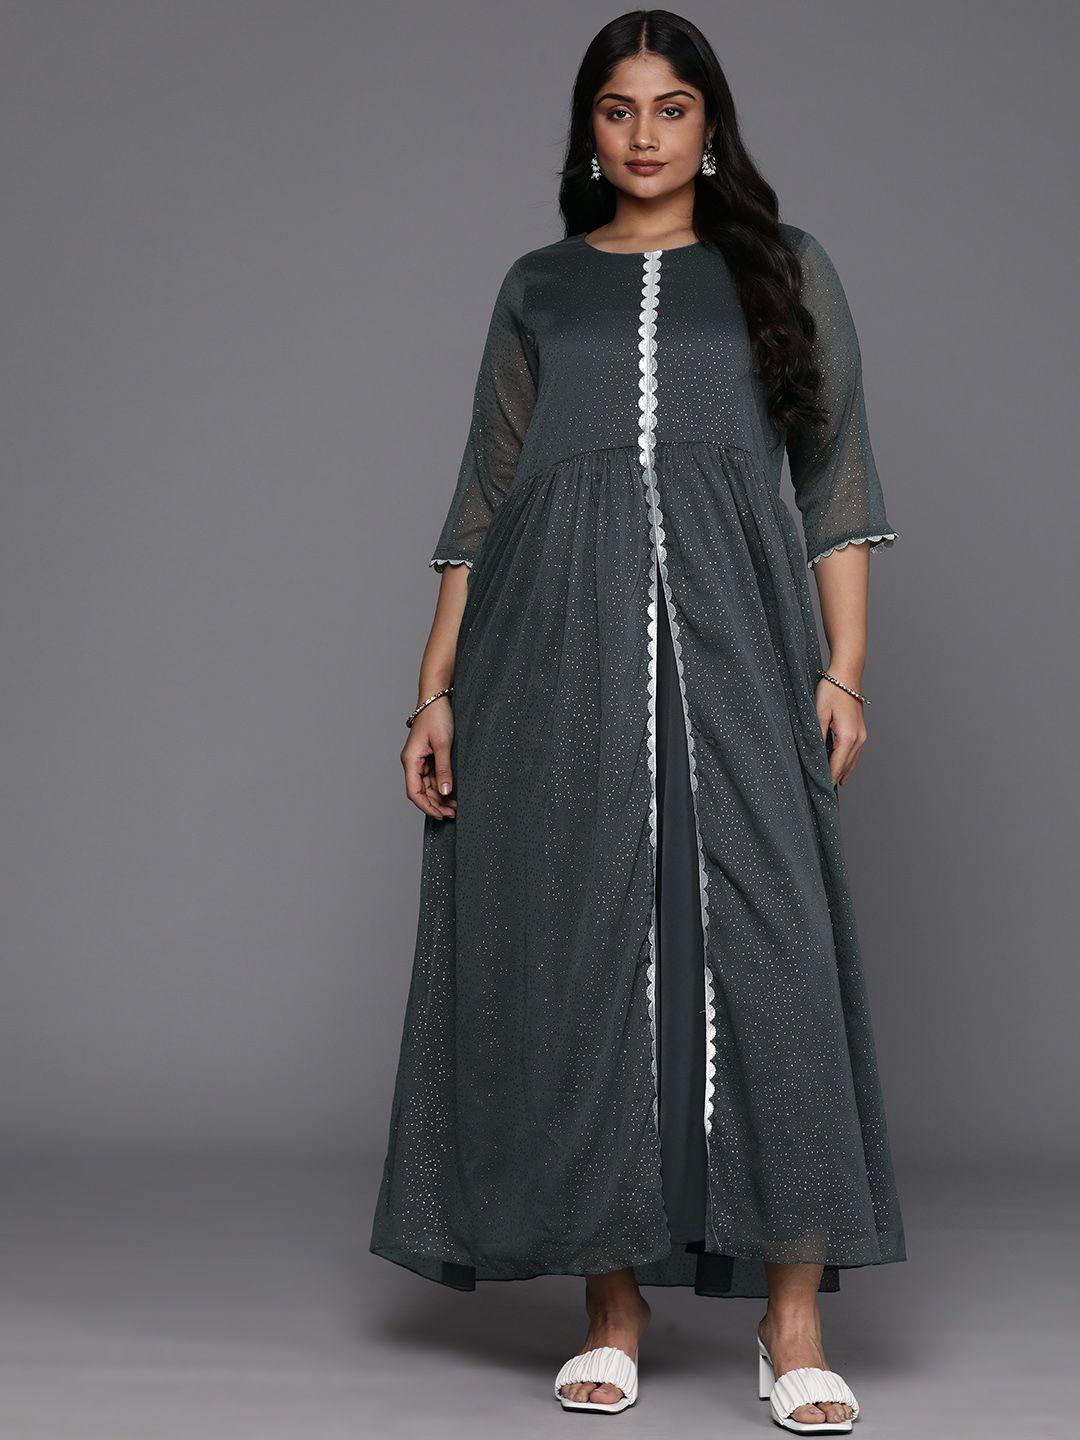 a-plus-by-ahalyaa-plus-size-abstract-print-layered-ethnic-dress